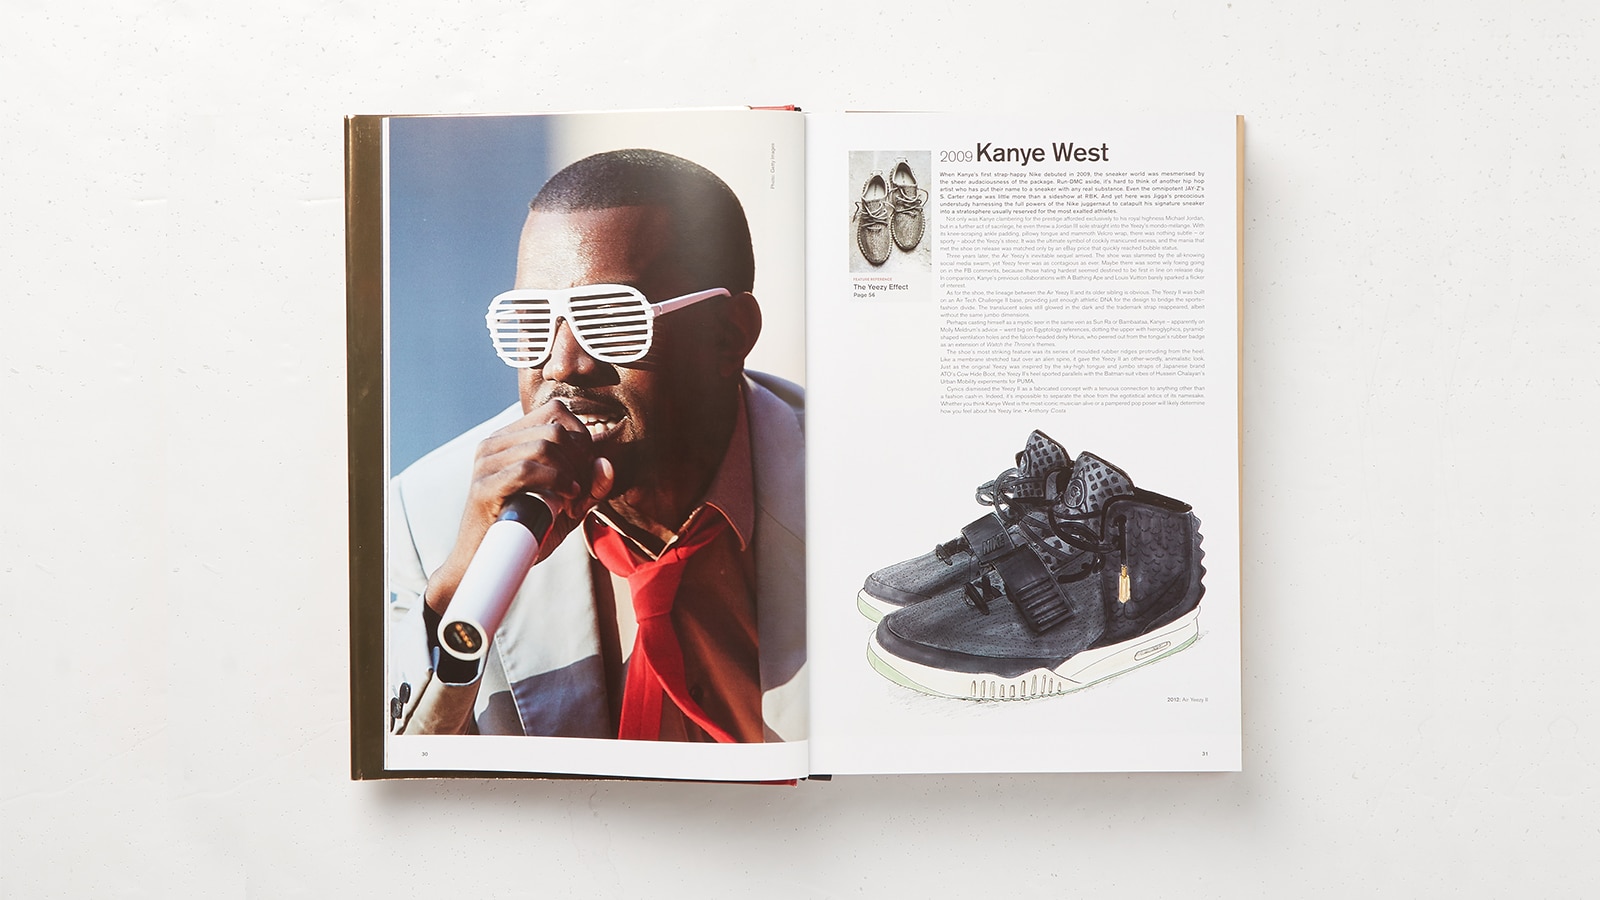 Five Iconic Moments In Modern Sneaker History The Journal Mr Images, Photos, Reviews